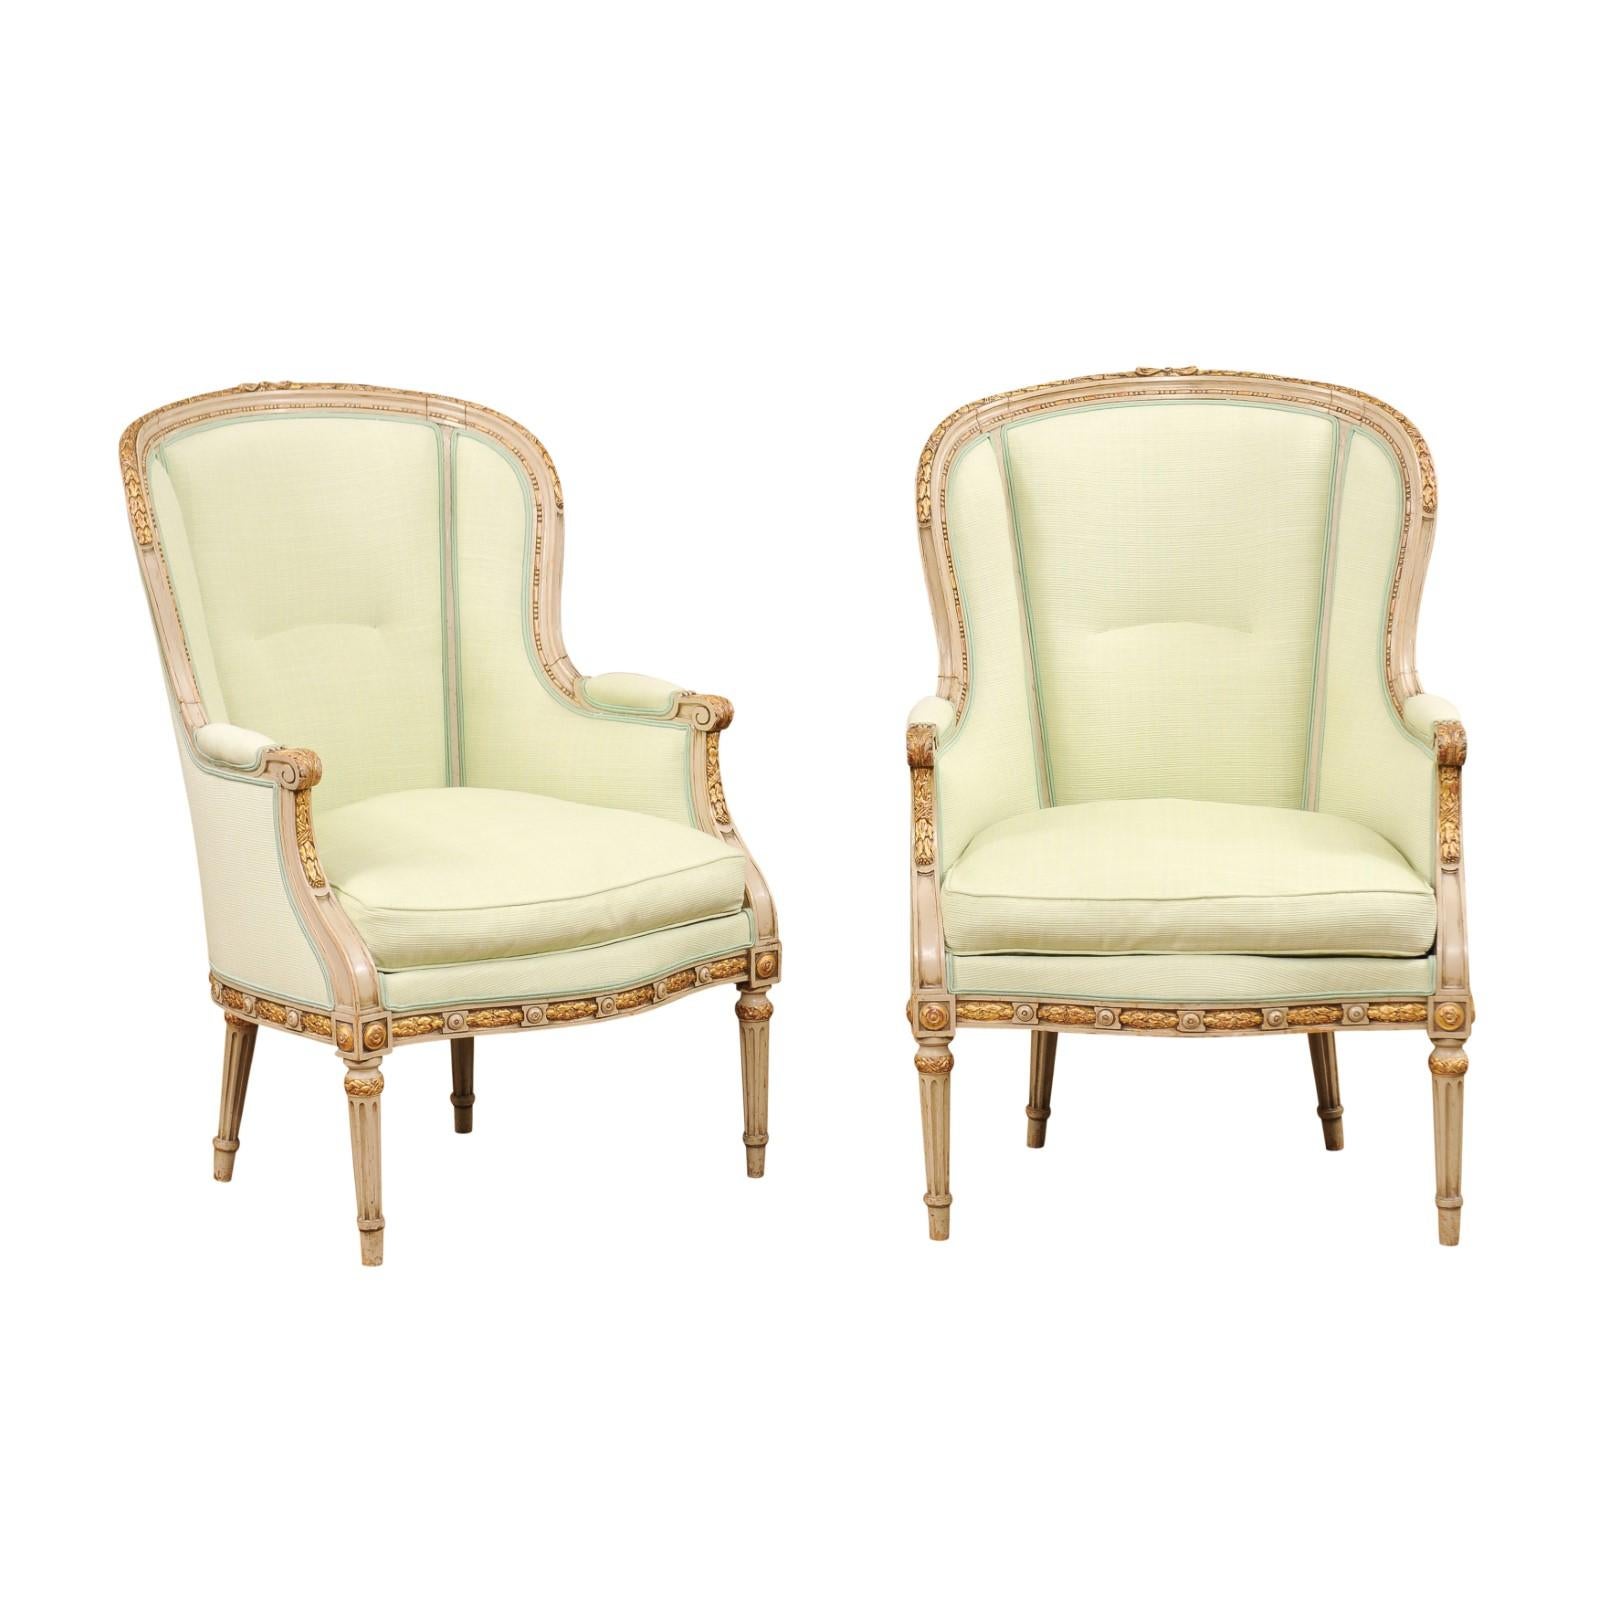 A pair of French Louis XVI style painted wood, parcel-gilt bergères chairs from the early 20th century with soft yellow green double welt upholstery, scrolled arms, carved foliage and fluted legs. Created in France at the Turn of the Century which